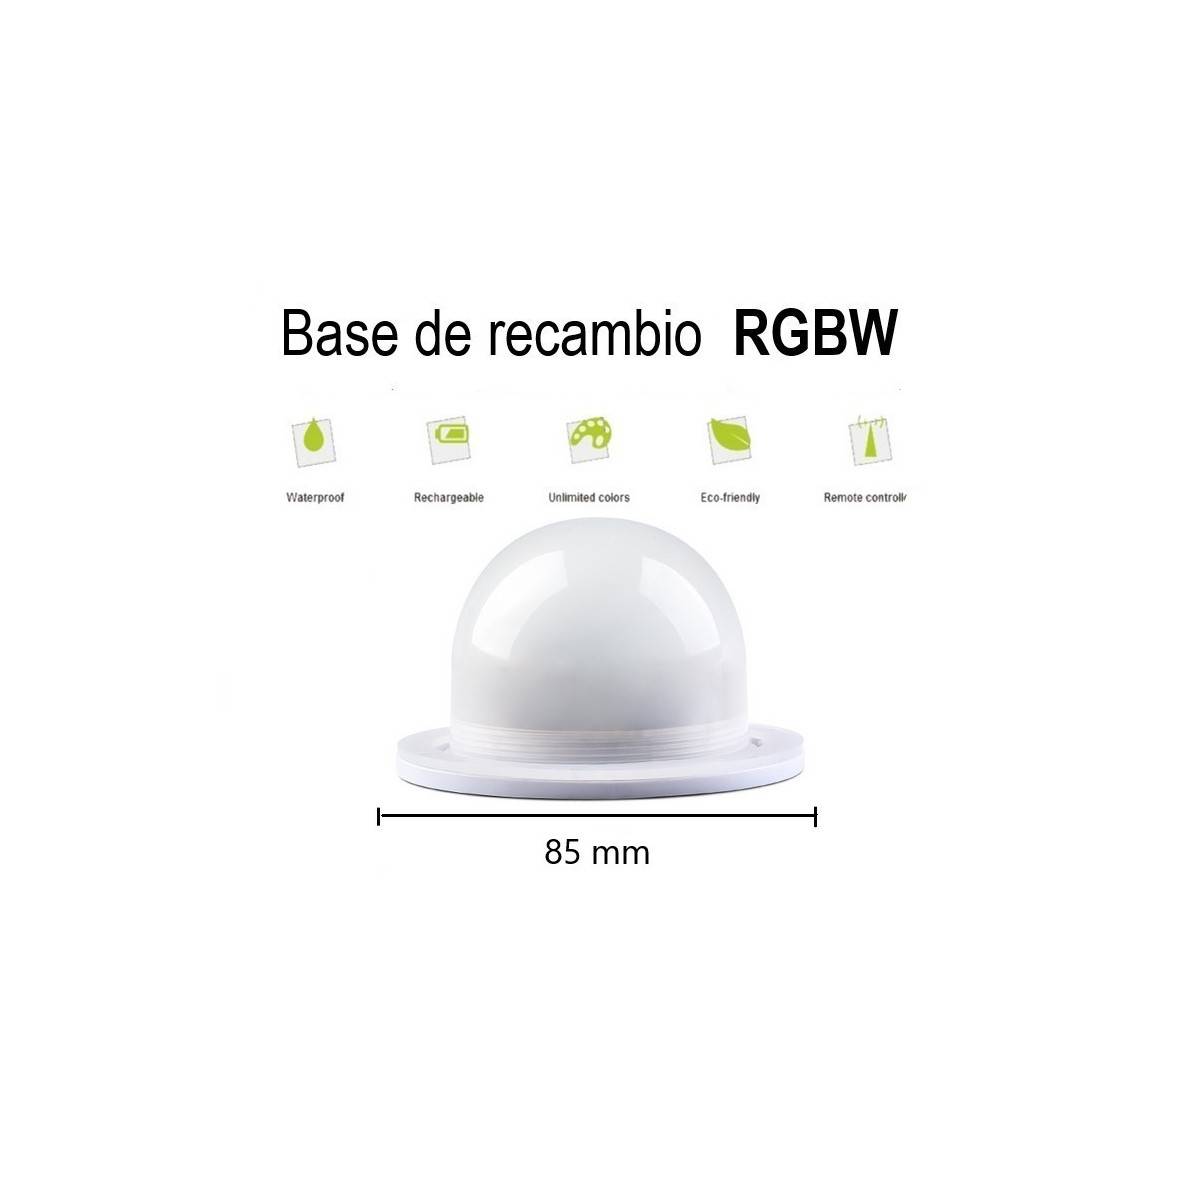 RGBW replacement base